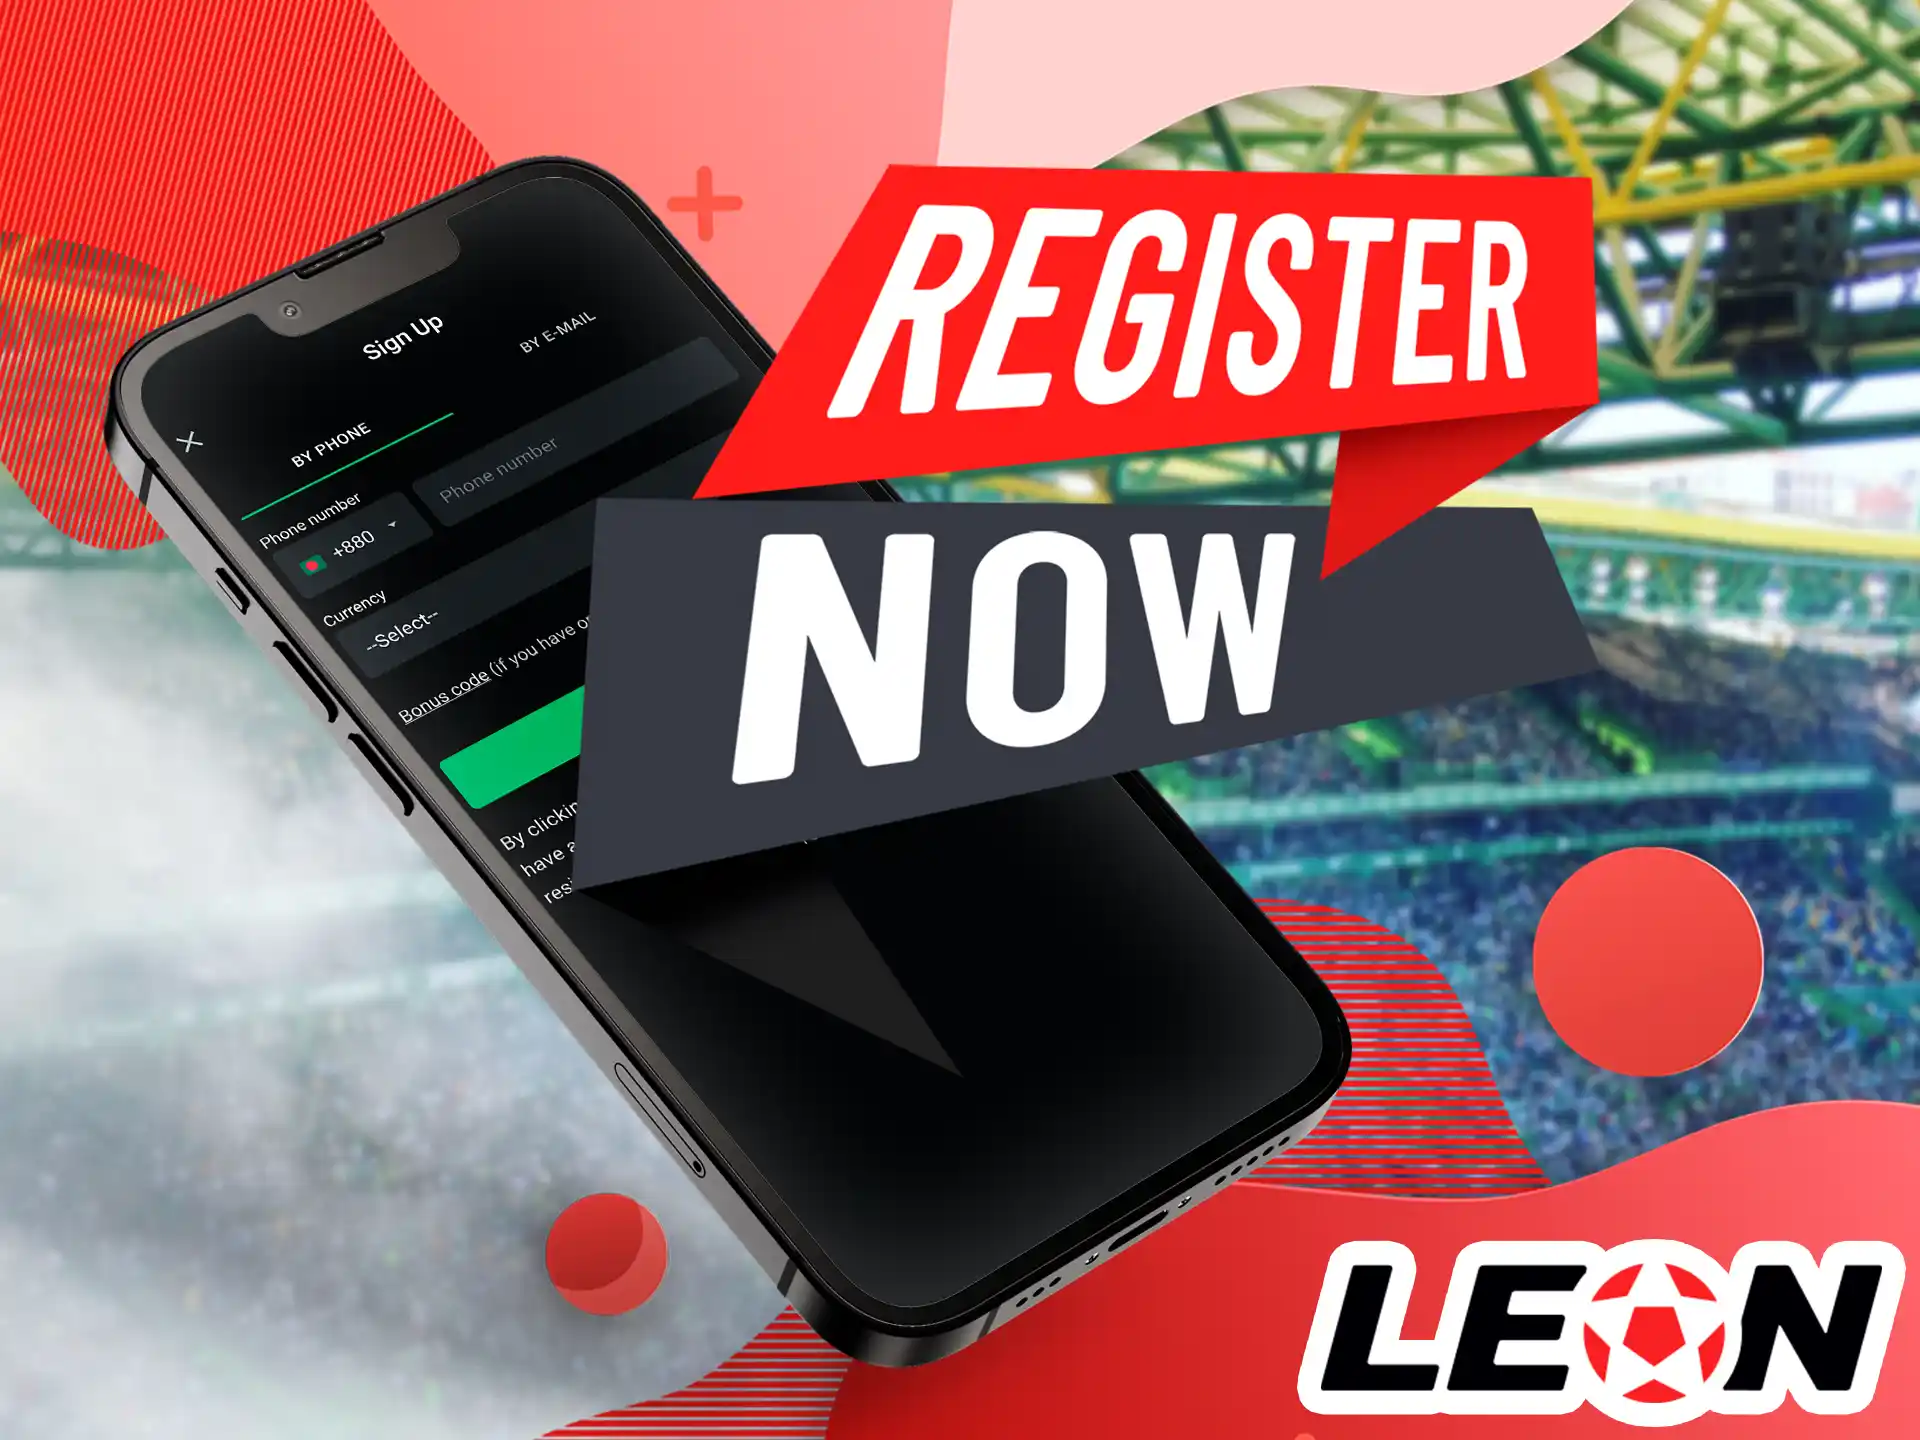 The rules of the bookmaker say that all customers need to start by creating an account in the Leon Bet App, our detailed guide will help you do that.